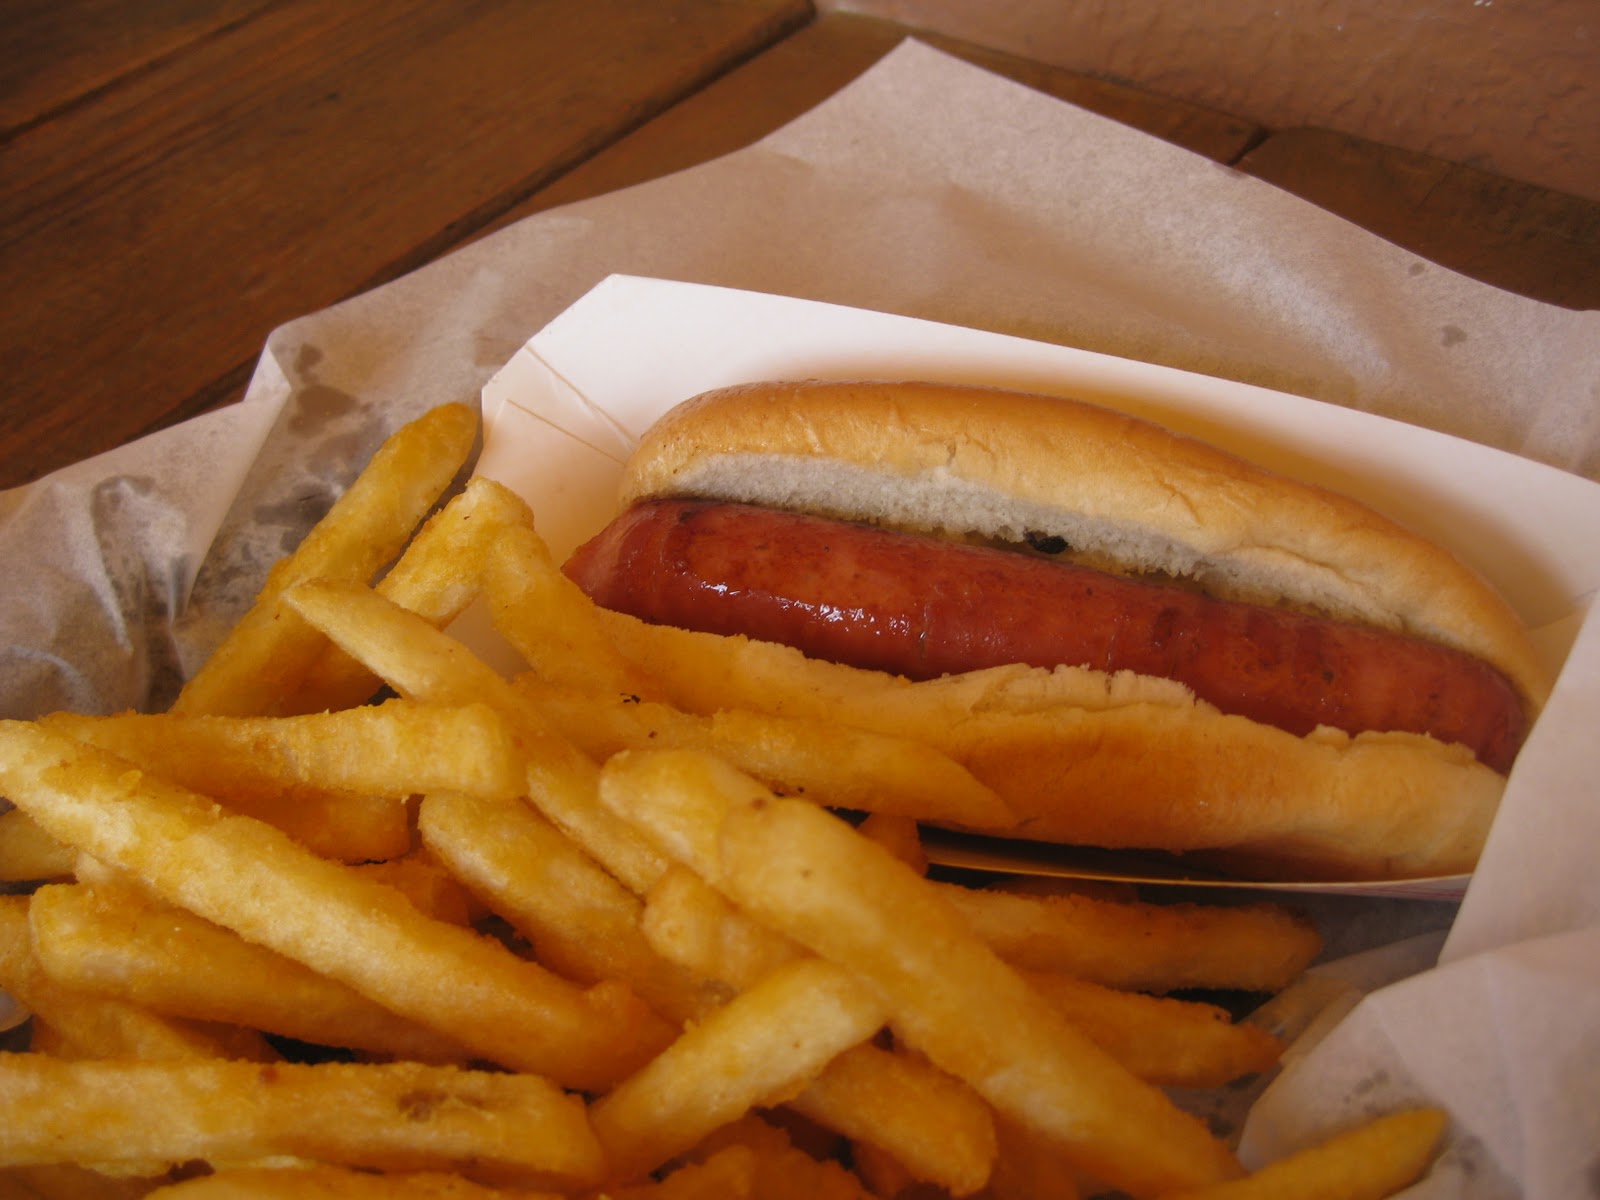 Hot dog with French Fries. Let me also mention that the service was really